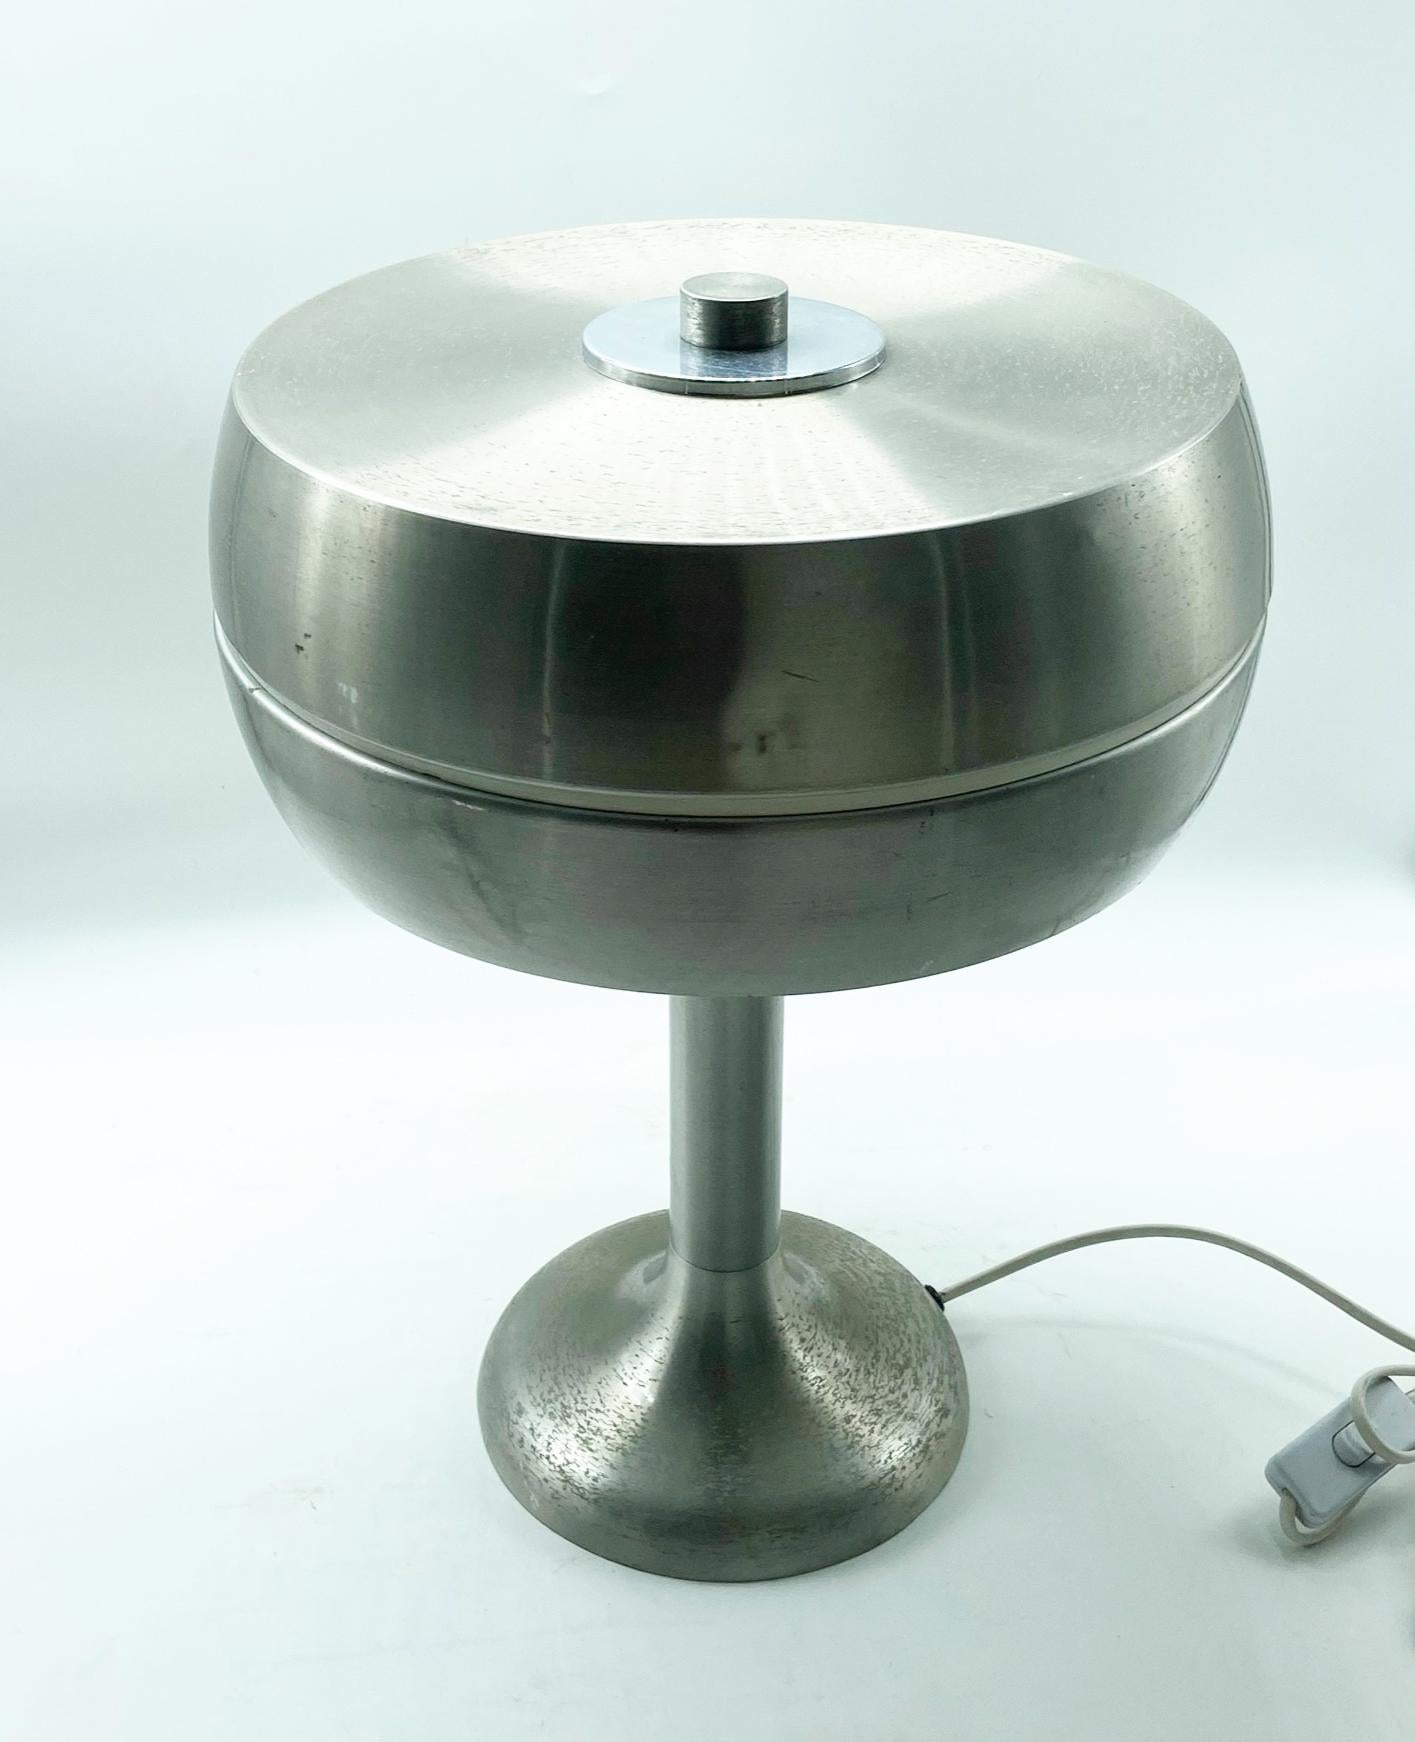 Table lamp in brushed nickel-plated aluminum from the 1960s.